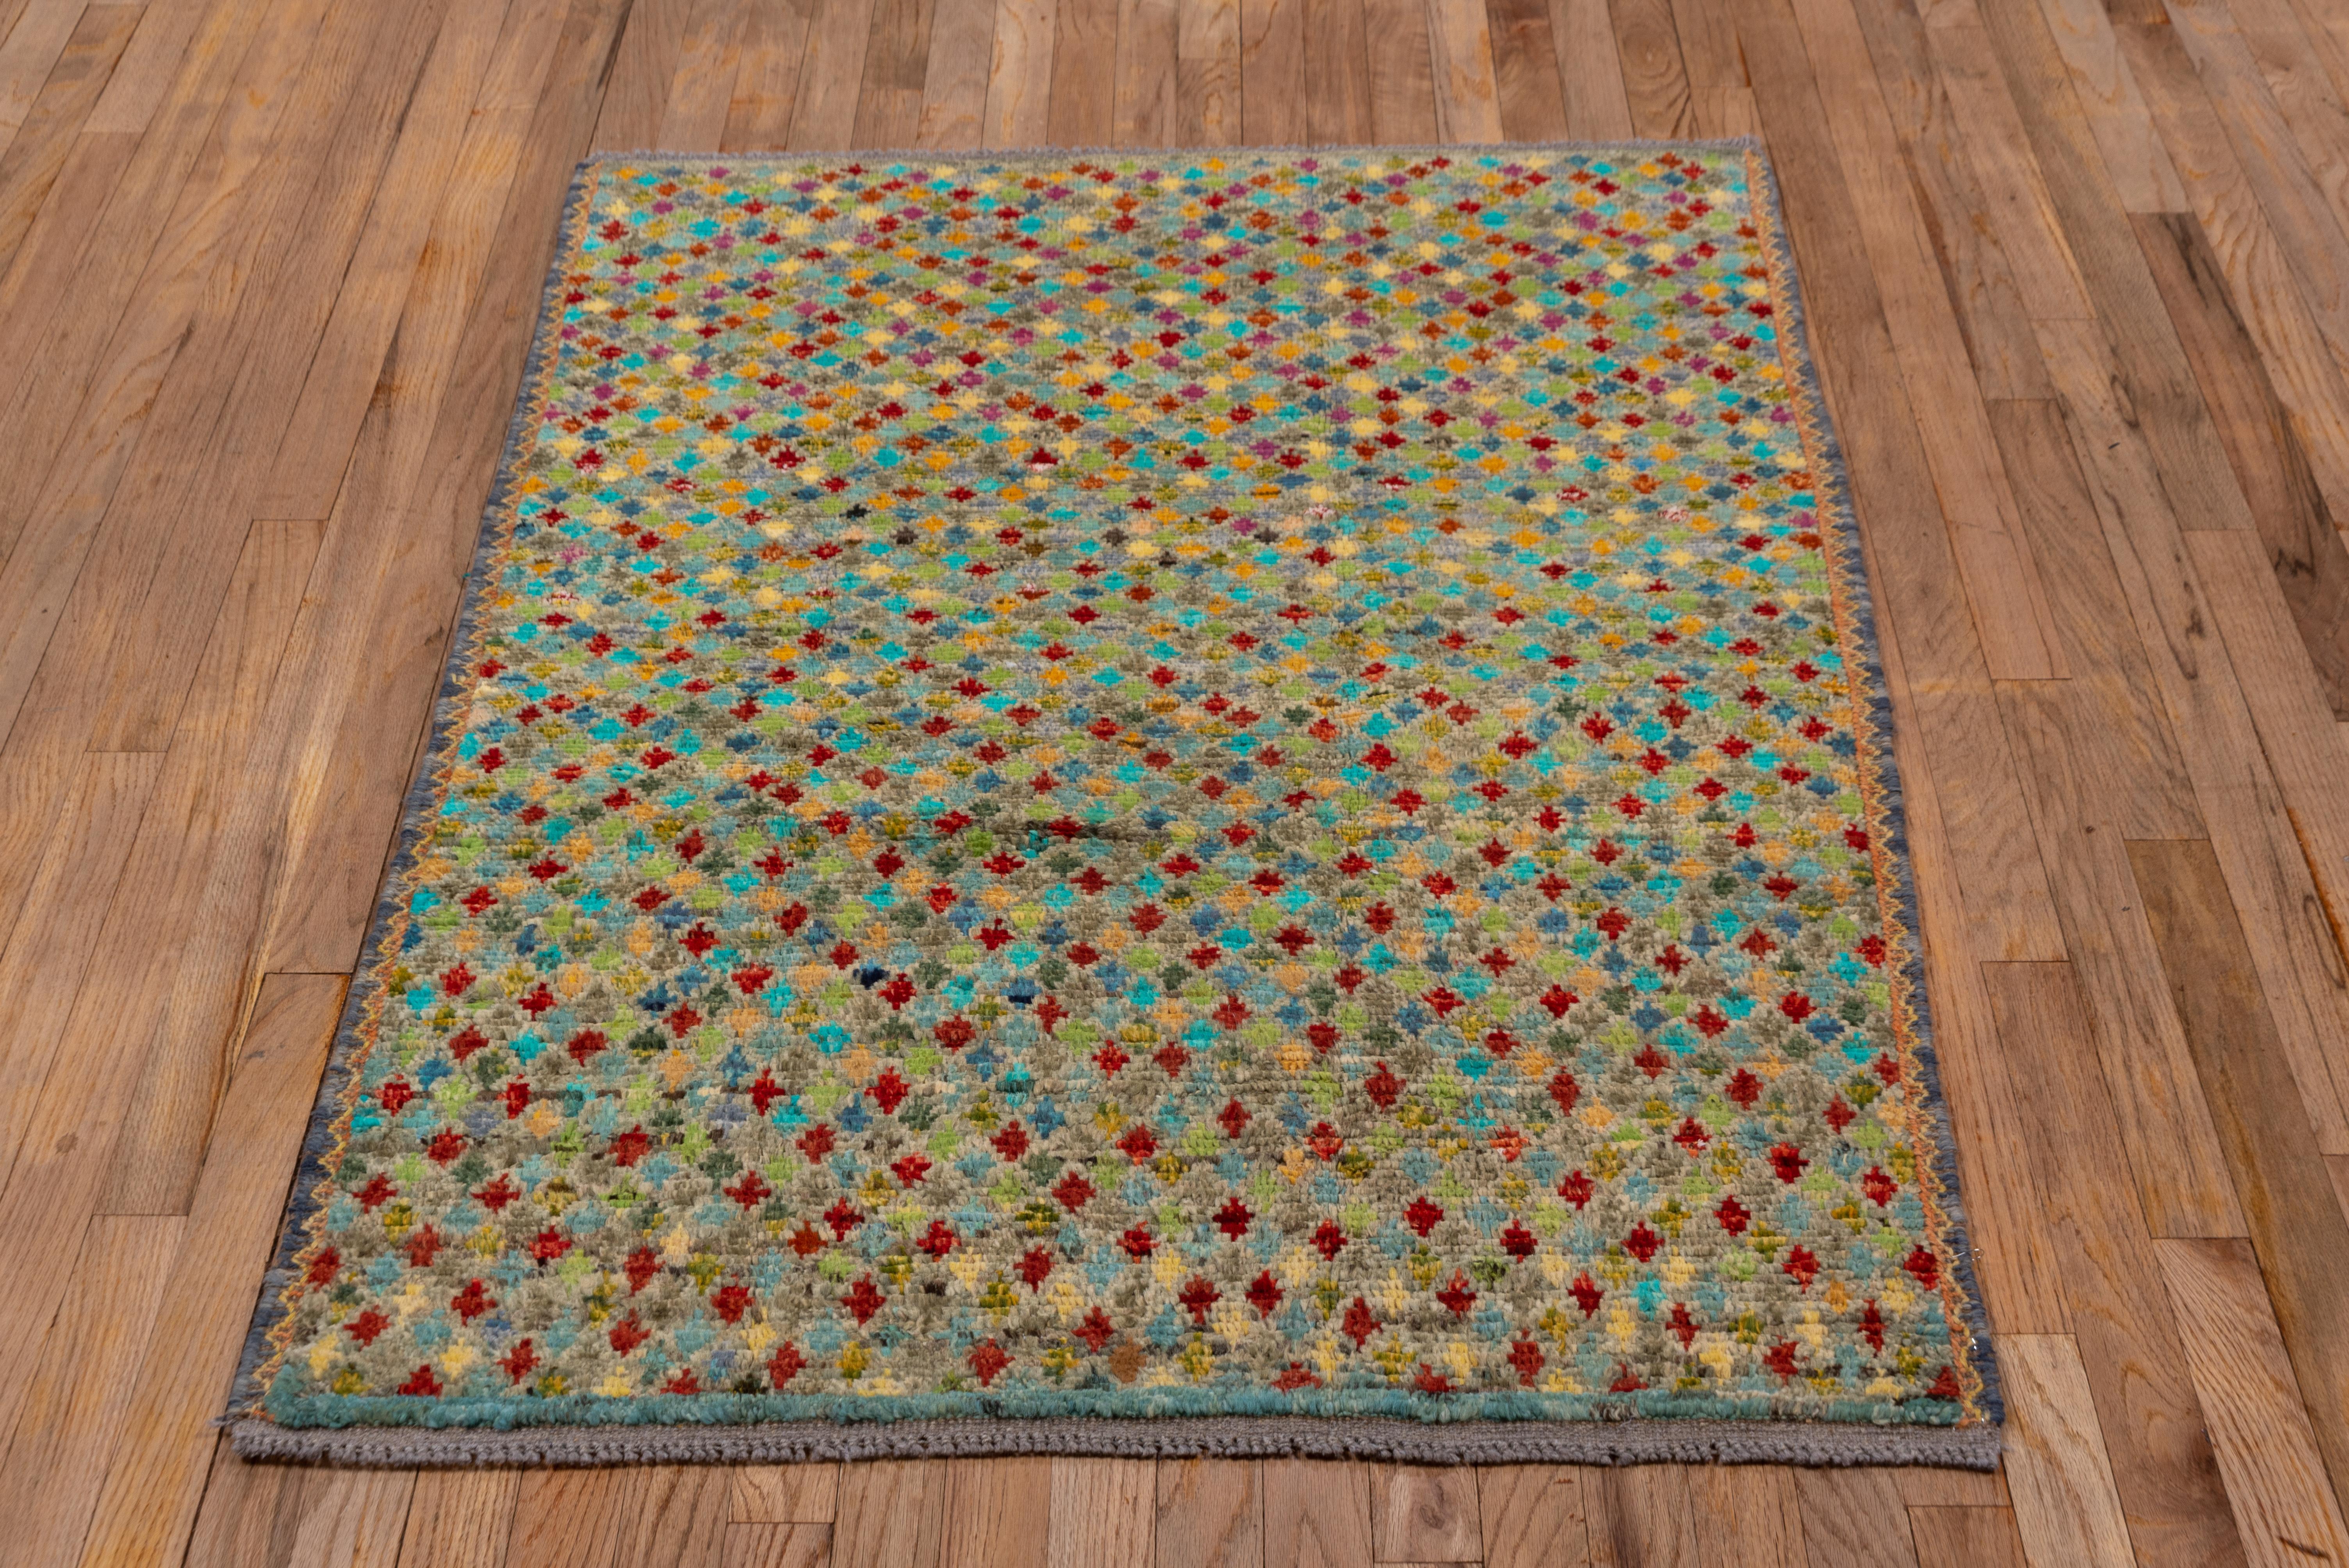 This rug has tiny lozenges in a random arrangement of colors including red, goldenrod, straw, teal, sky blue and celadon densely cover the ground of this small as new scatter with narrow, zig-zag side borders. Every color section is abrashed,